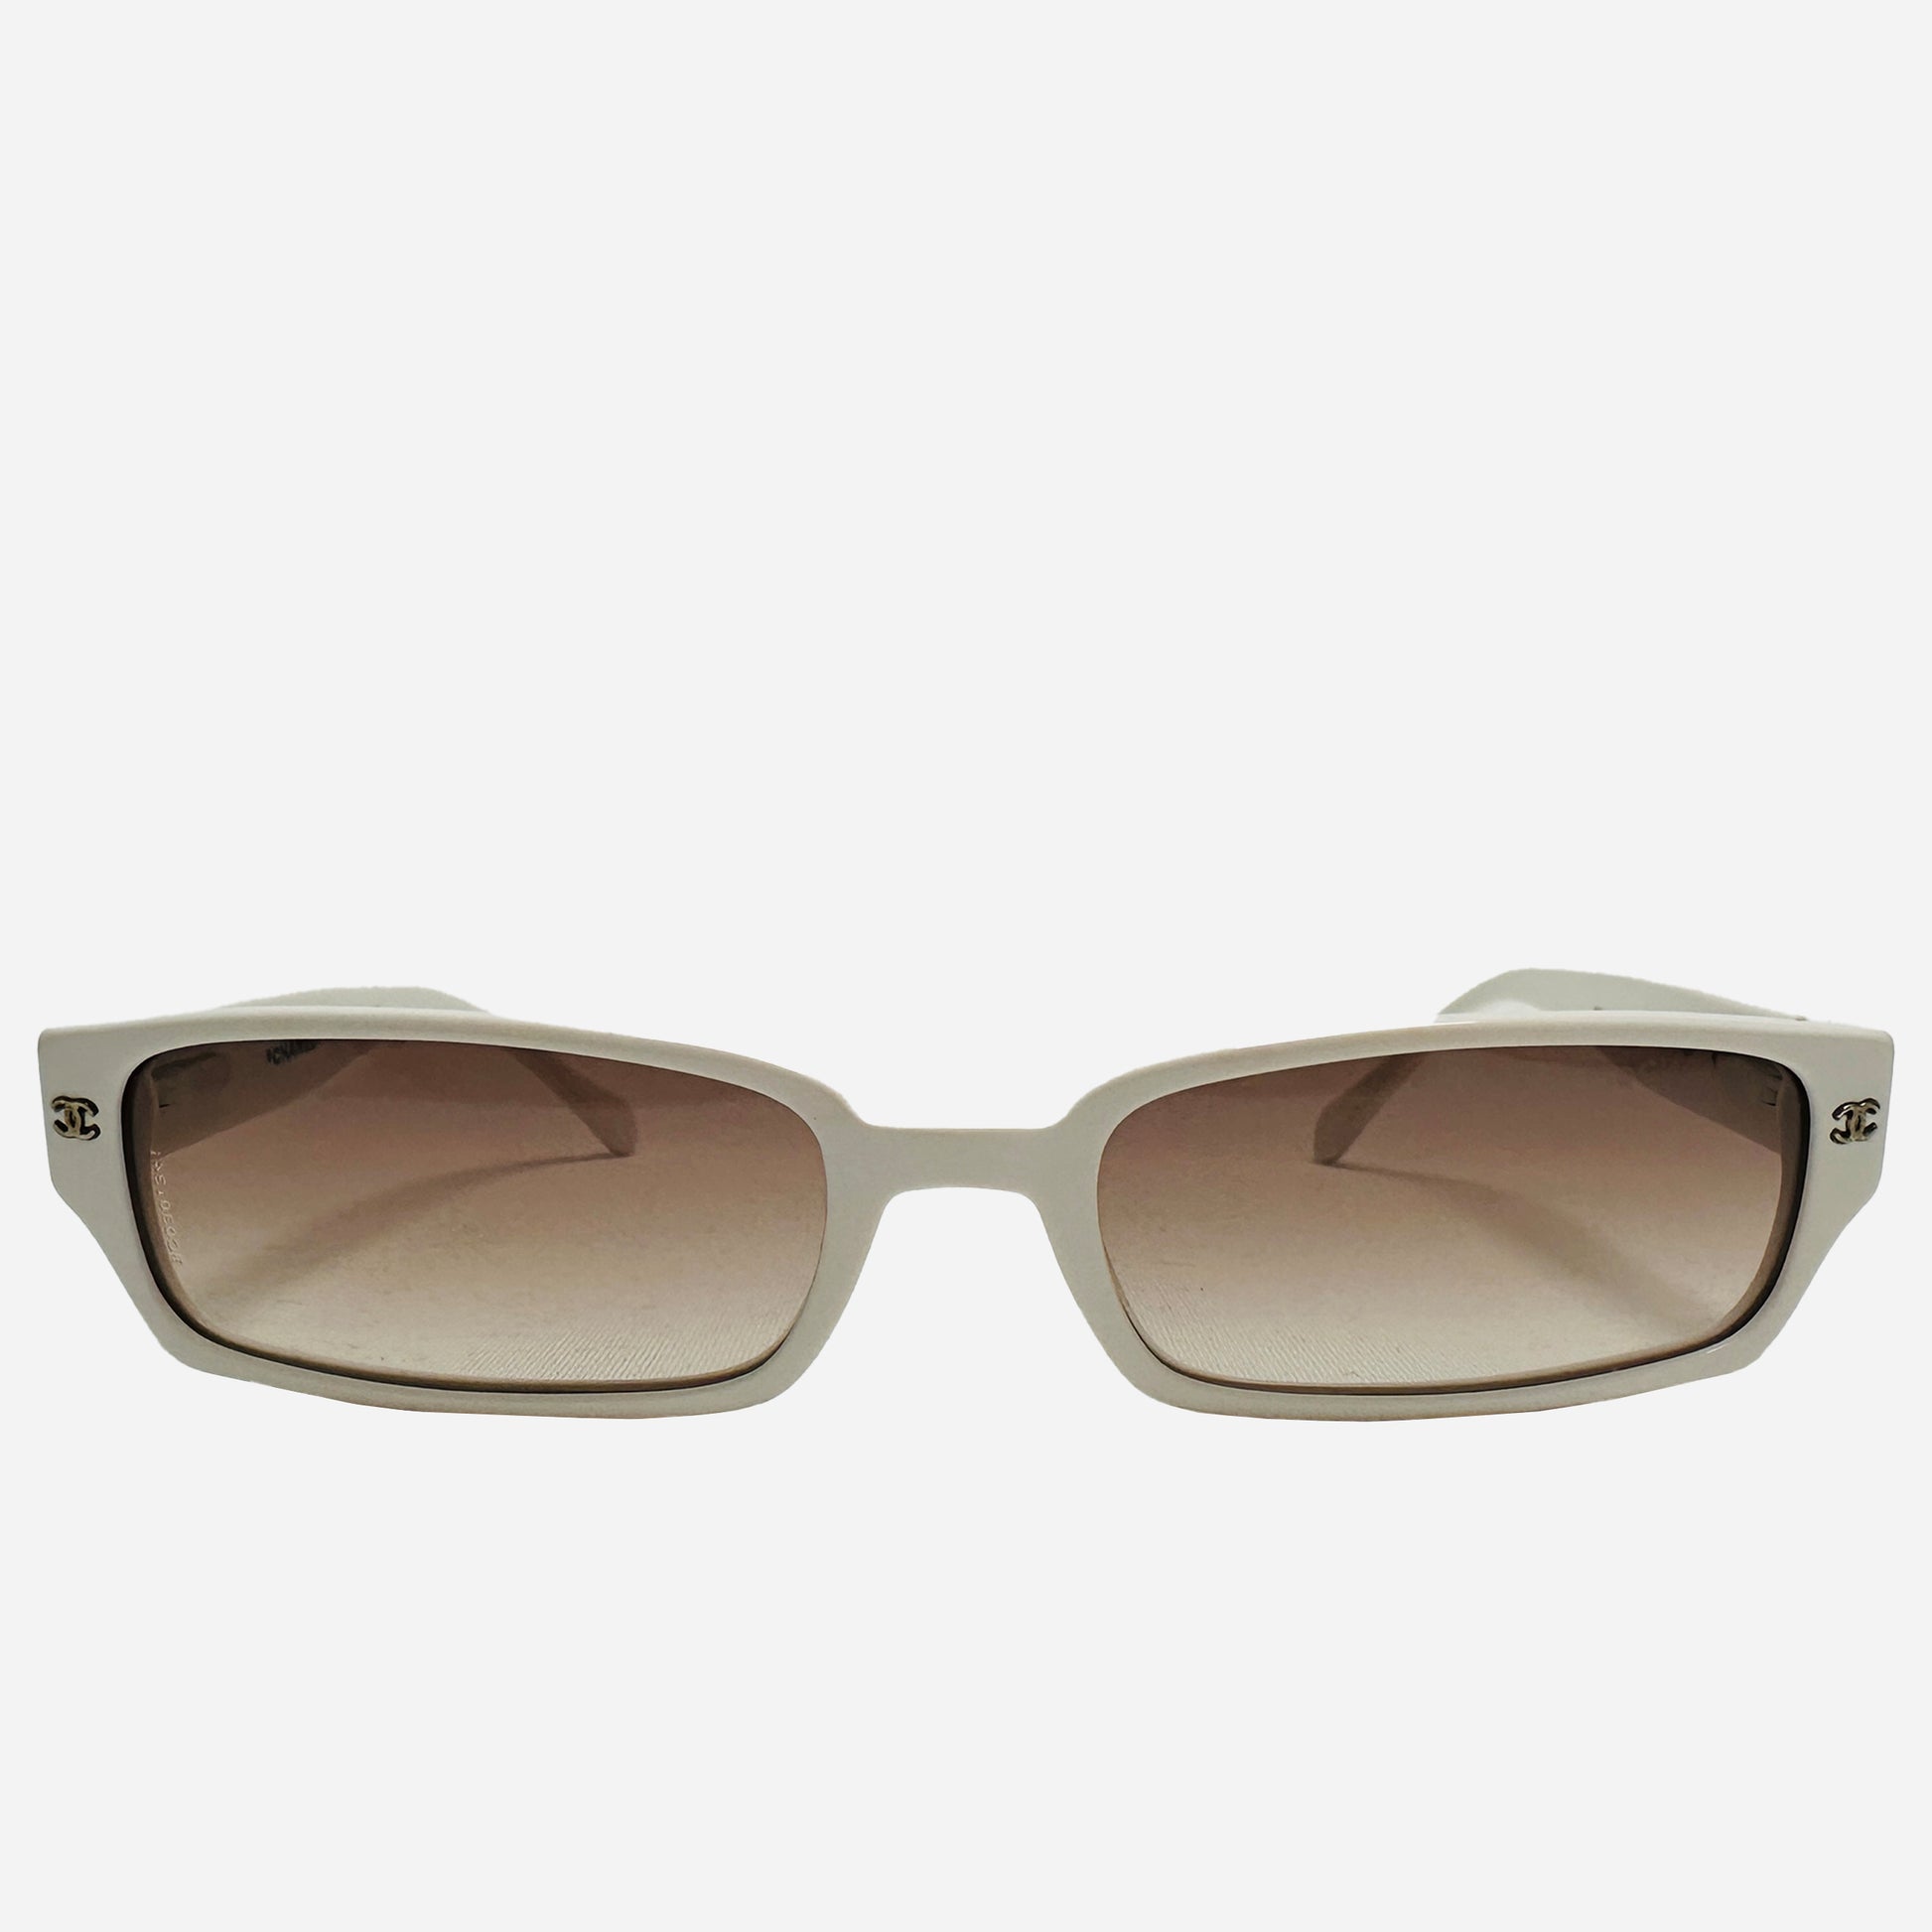 The-Seekers-Vintage-Coco-Chanel-Sunglasses-Sonnenbrille-5058